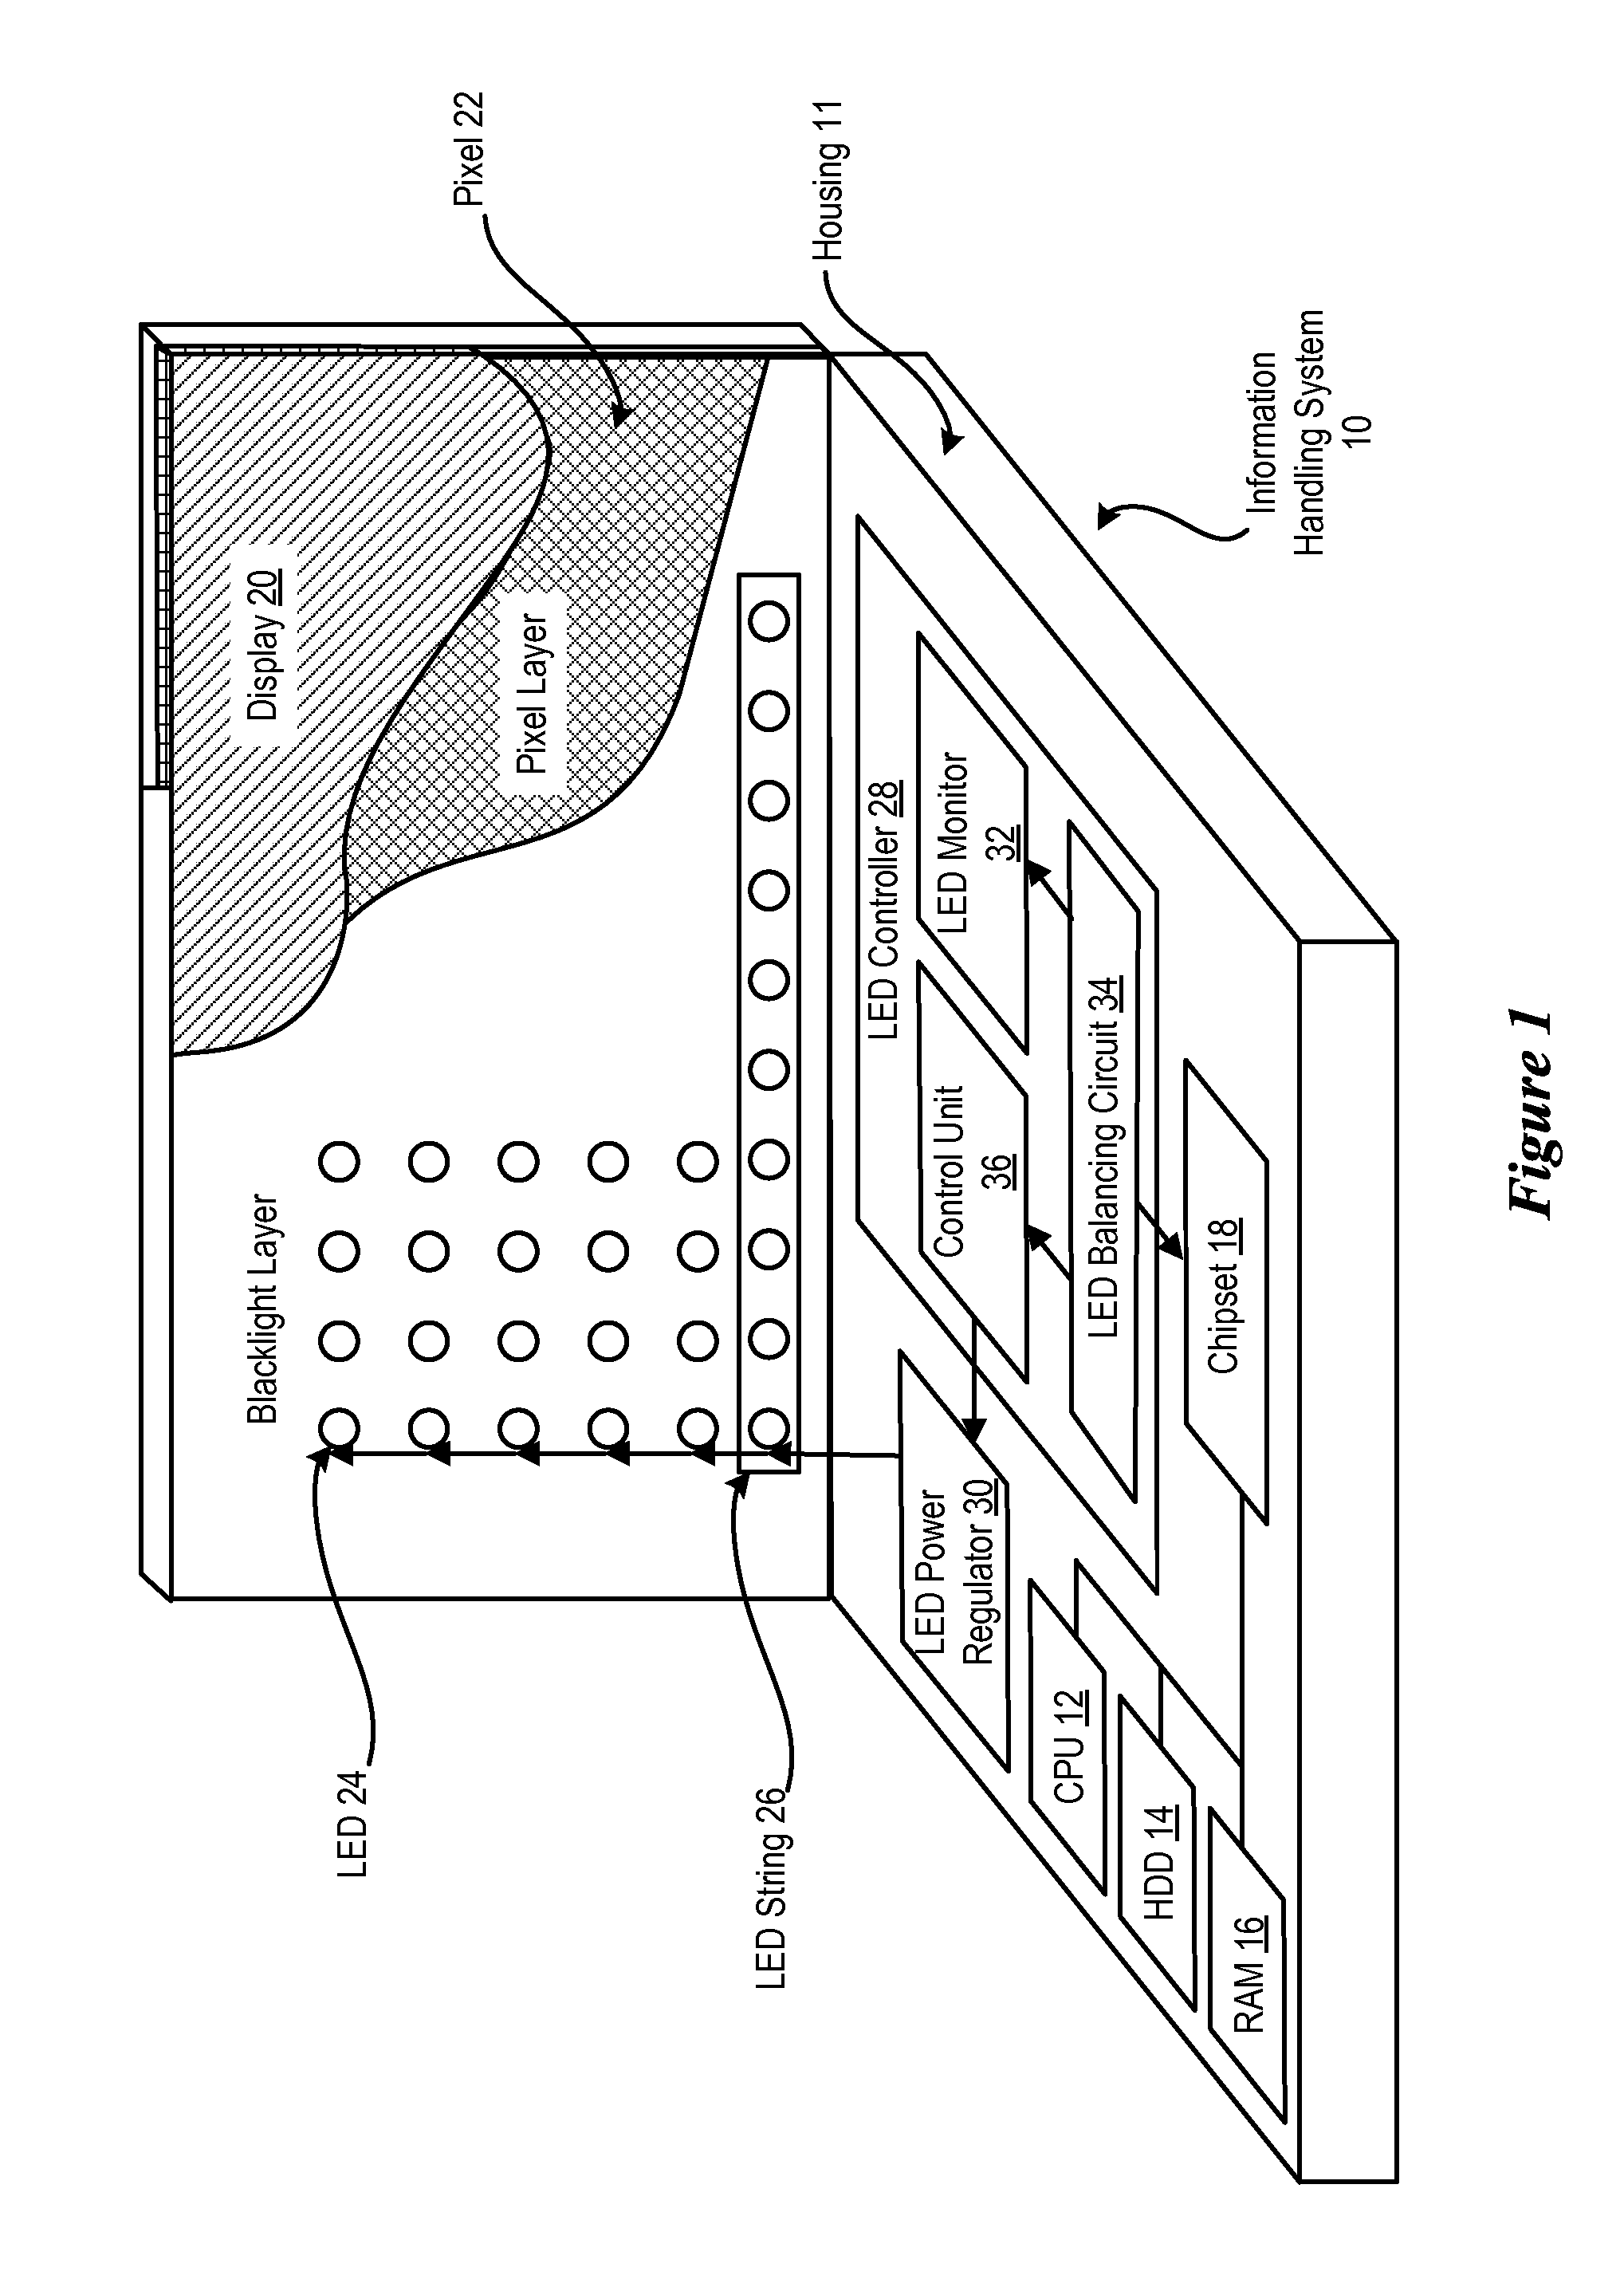 System and Method for Managing LED Backlight Performance in a Display